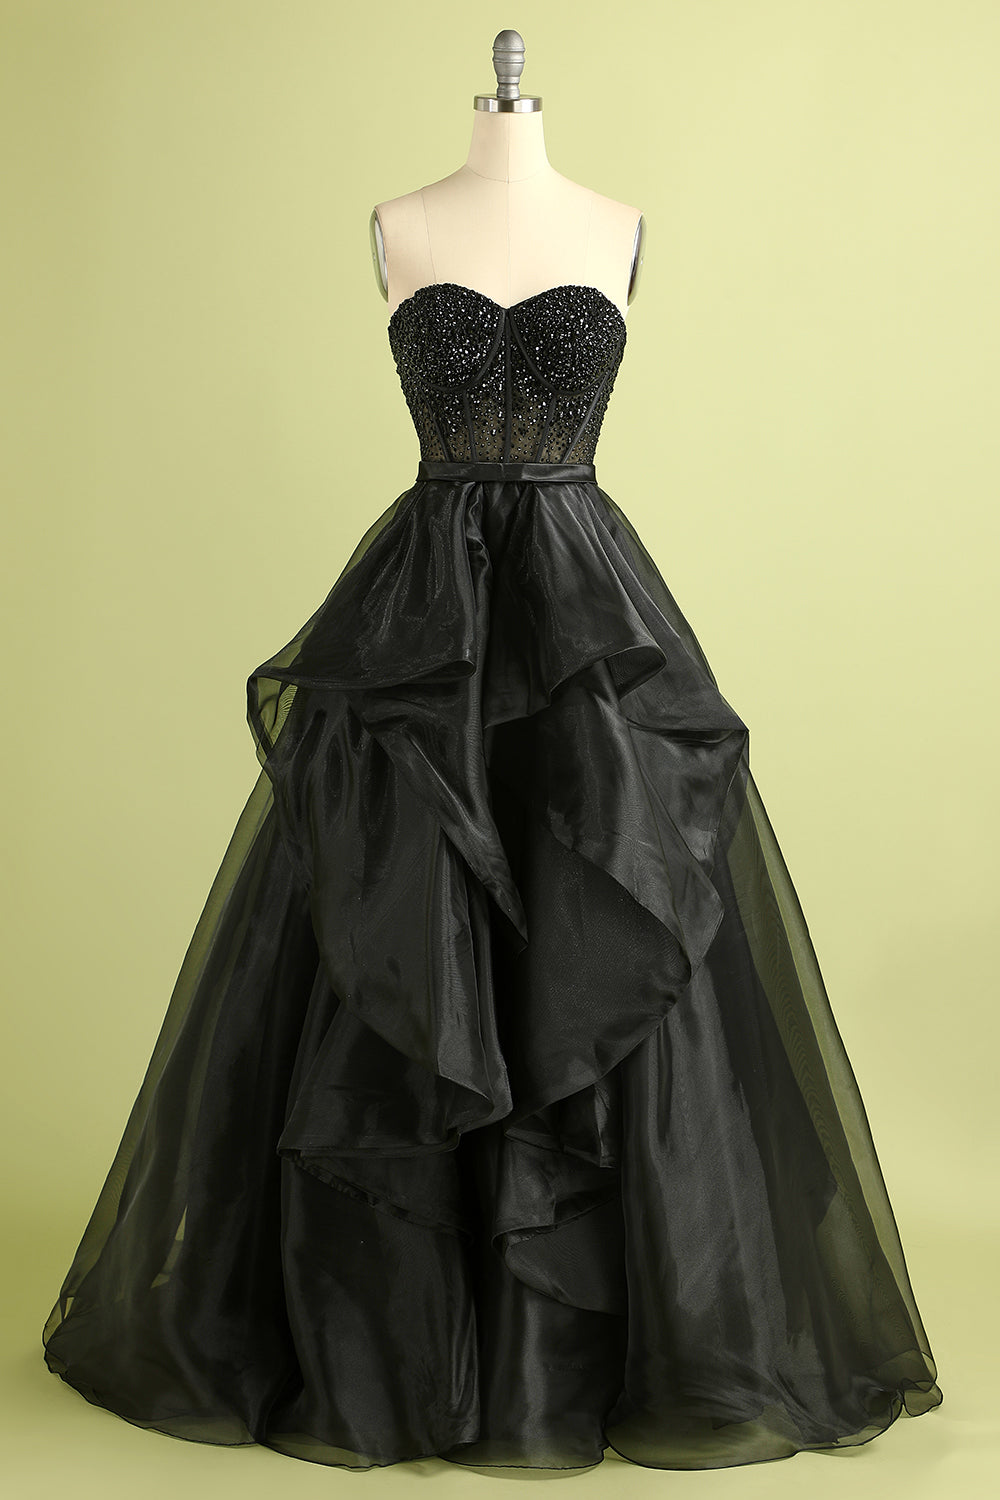 Details more than 182 black strapless evening gown best